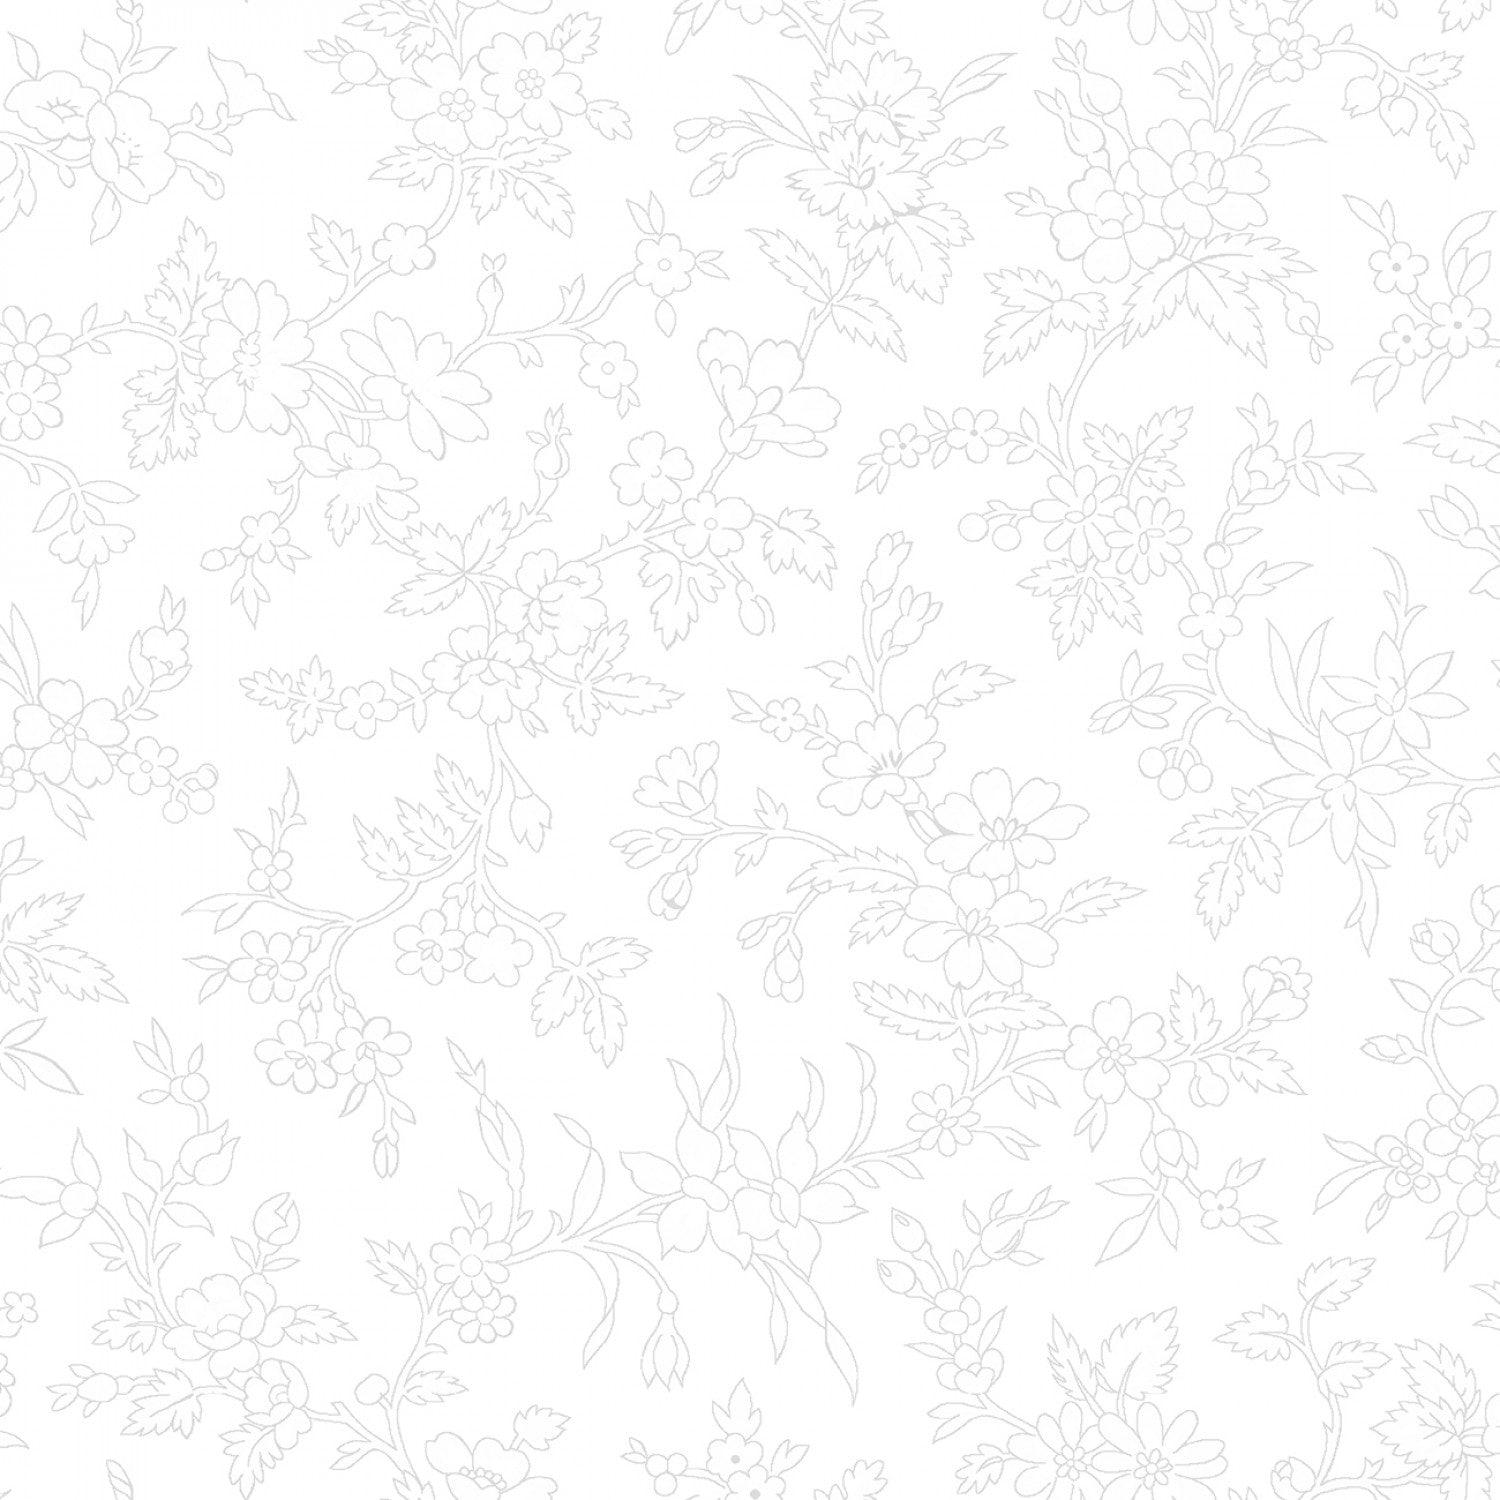 Queen Anne's Lace - White on White - 44" Wide - Kimberbell Basics - Kawartha Quilting and Sewing LTD.